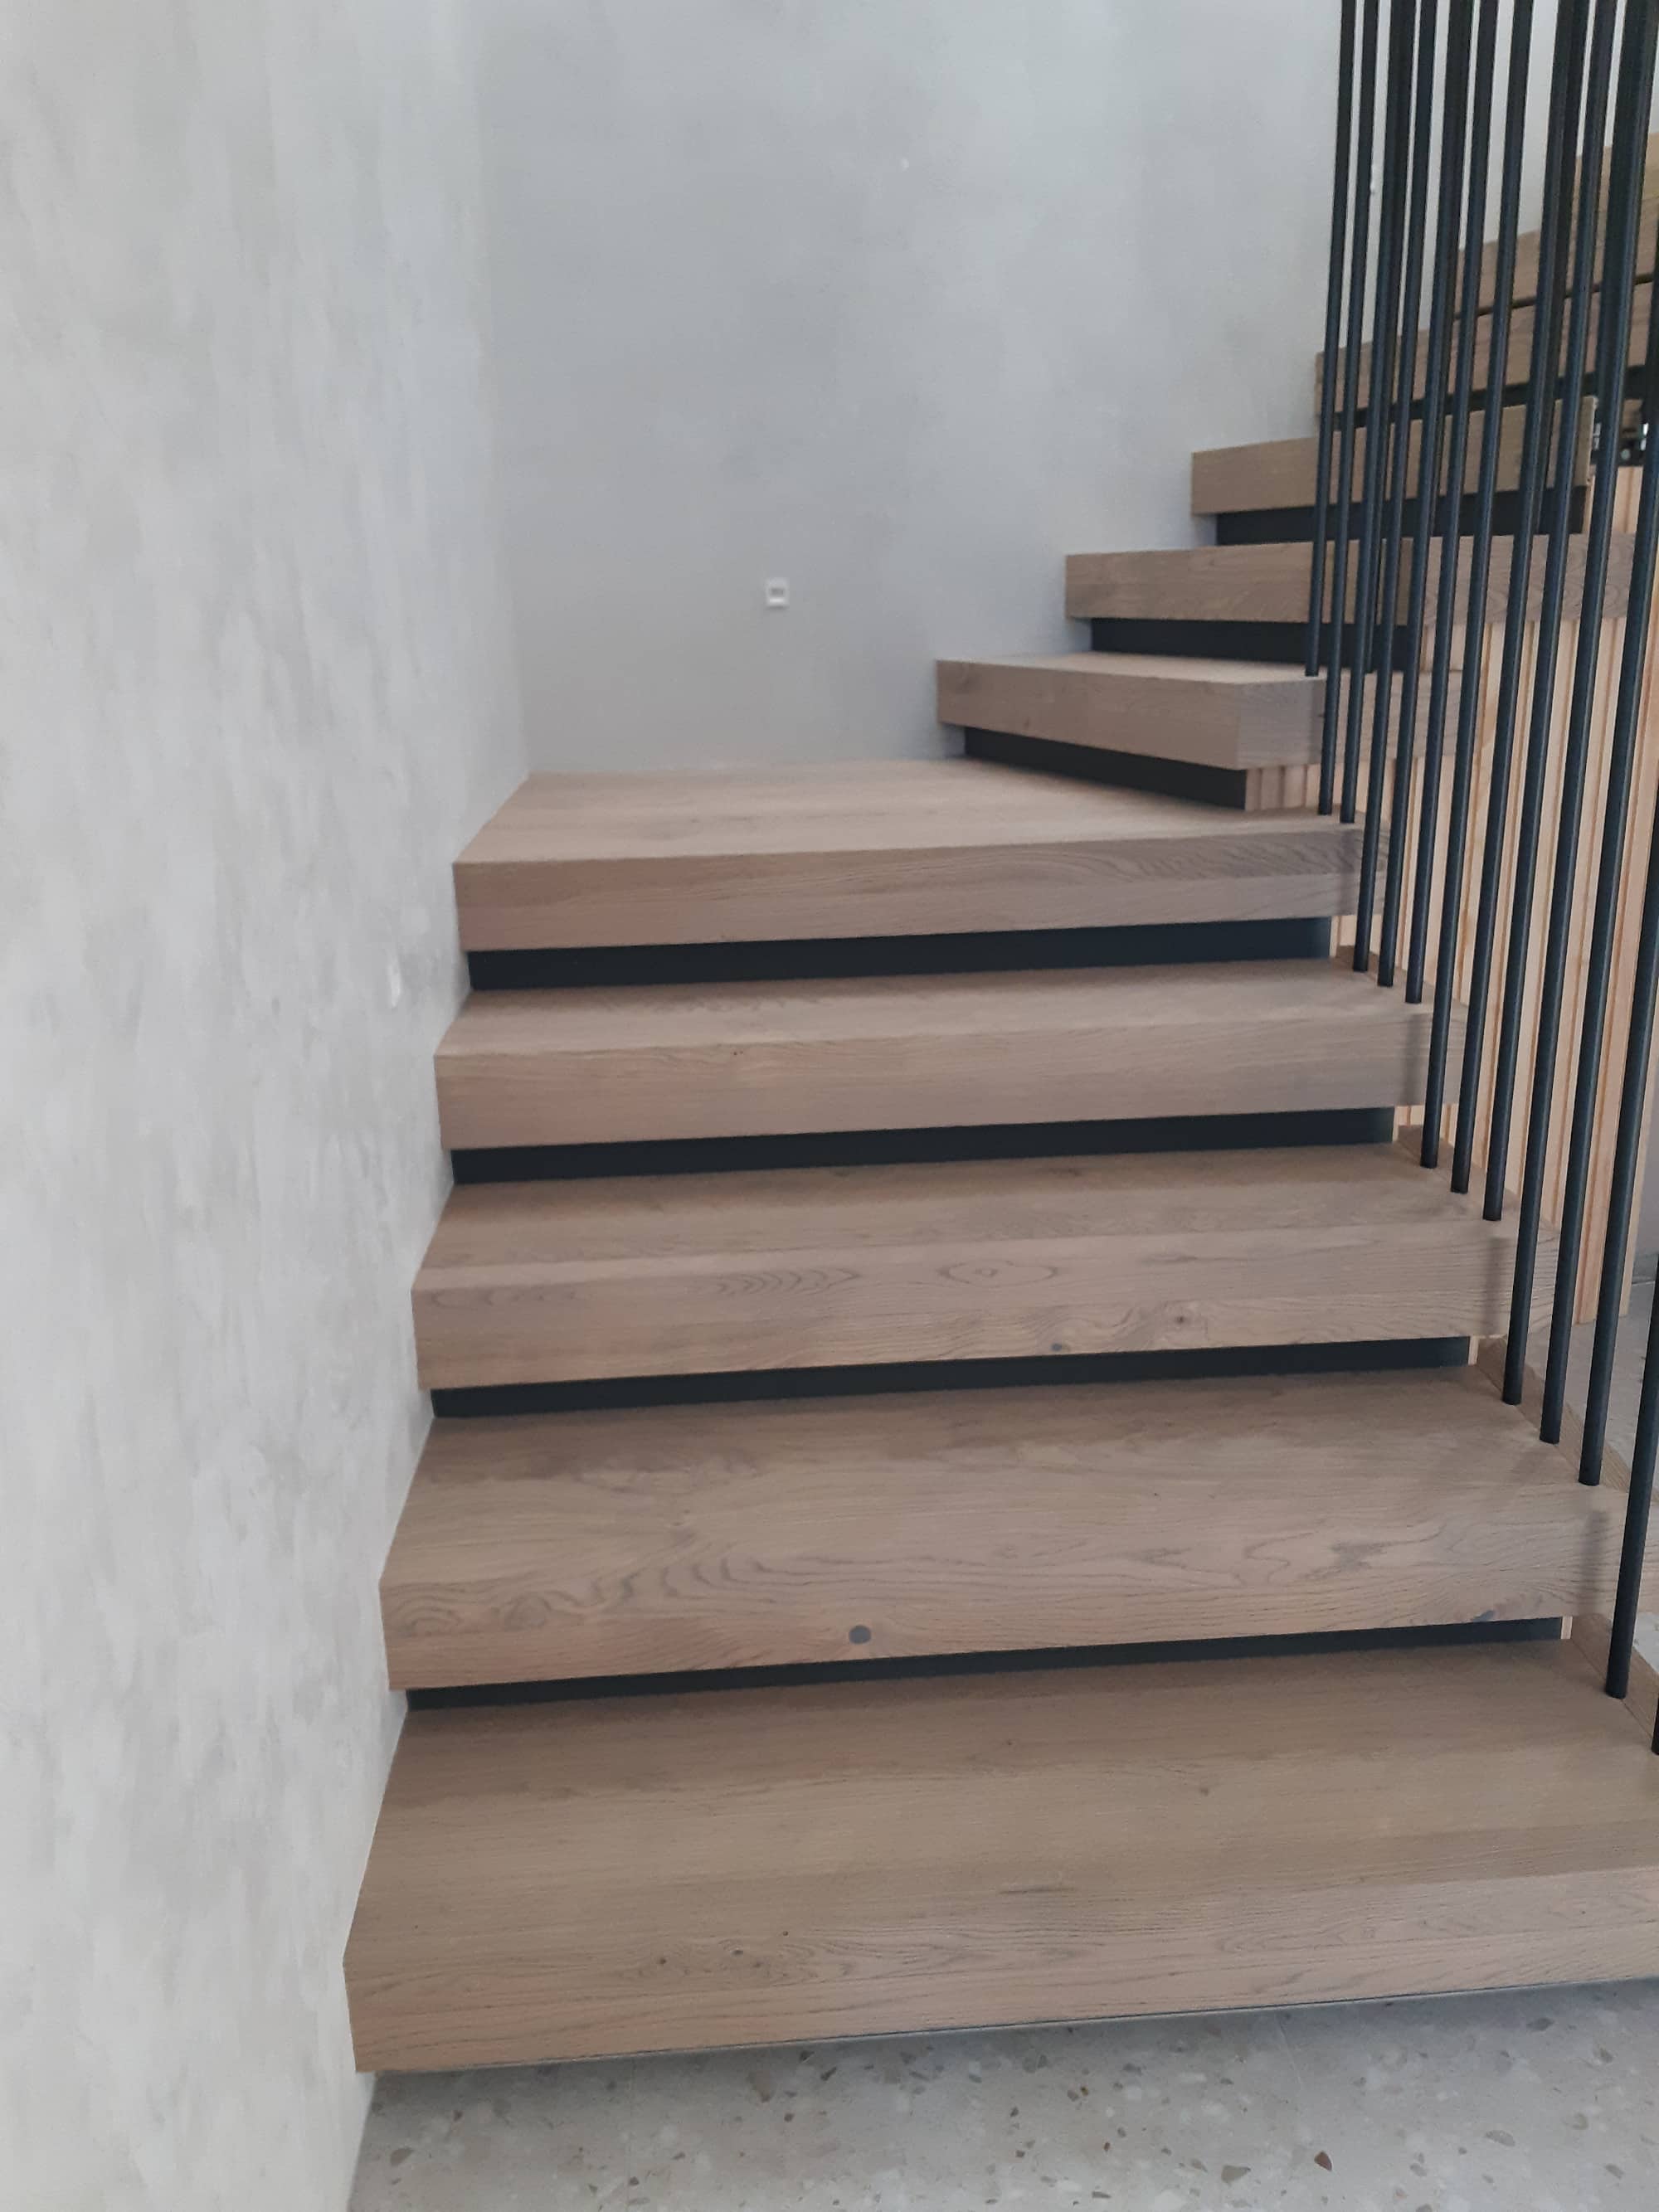 A standout timber staircase